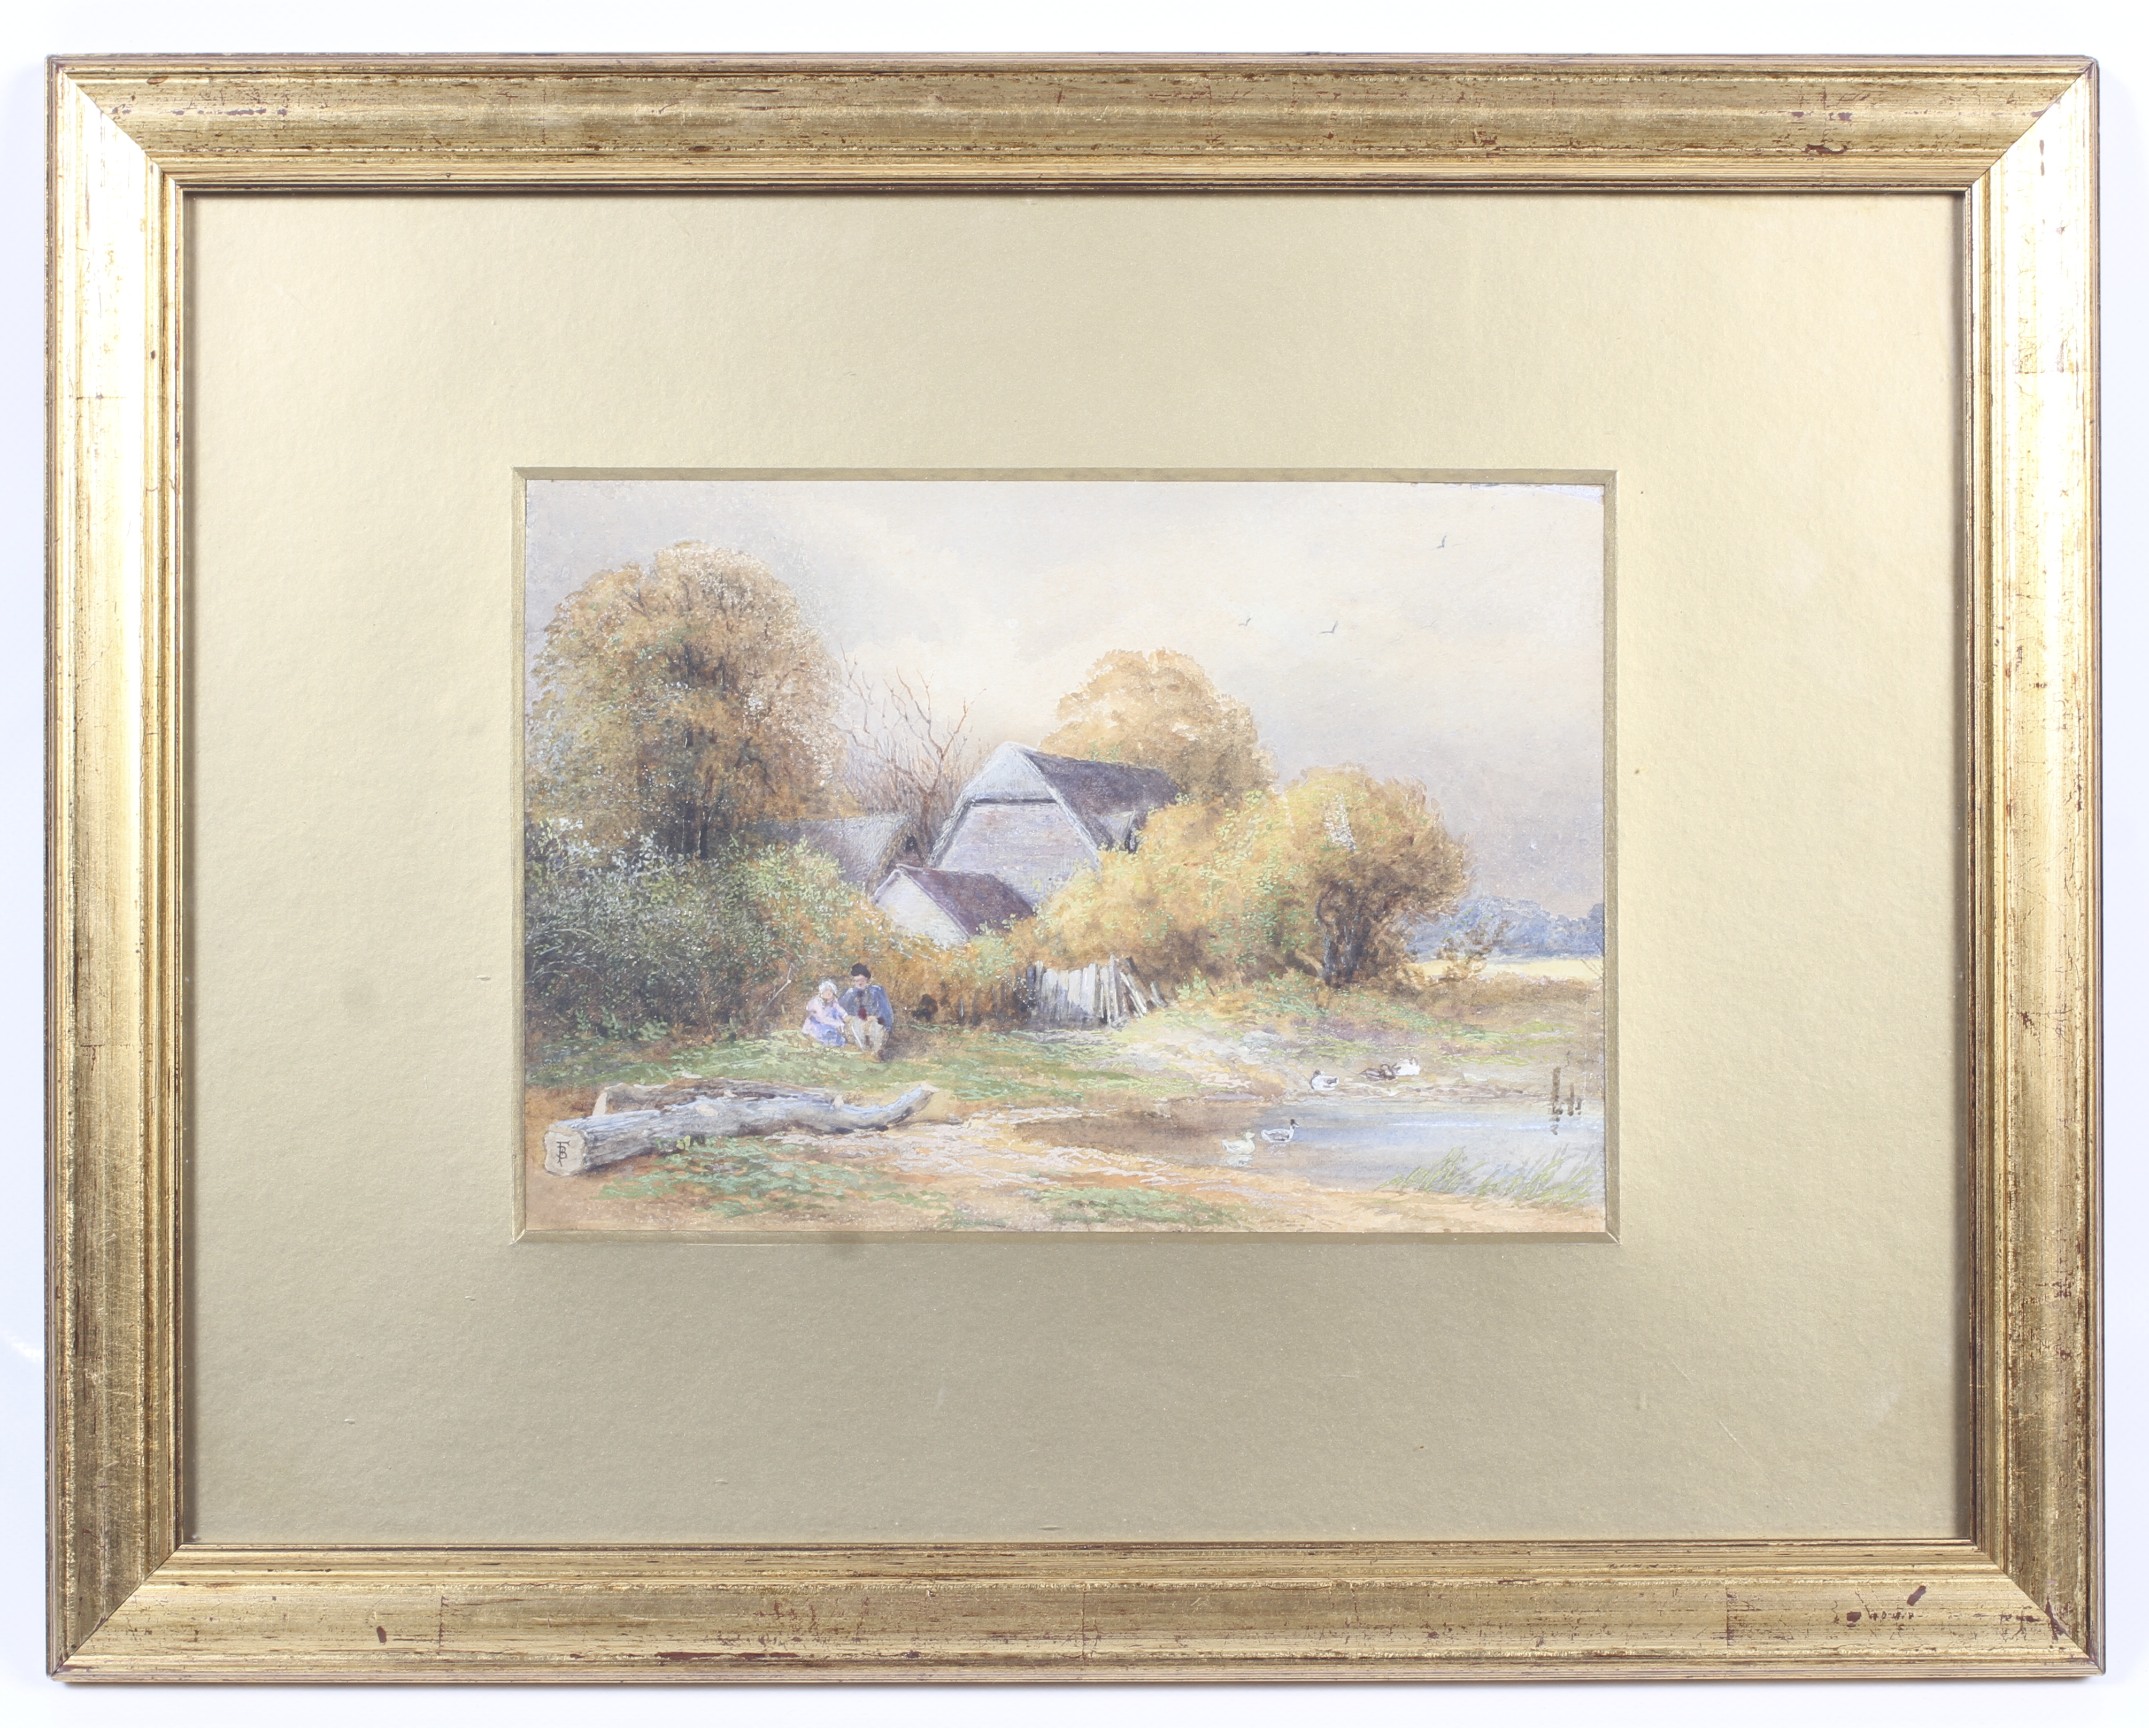 Myles Birkett Foster (1825-1899), watercolour with bodycolour, figures sat by a duck pond. - Image 2 of 3